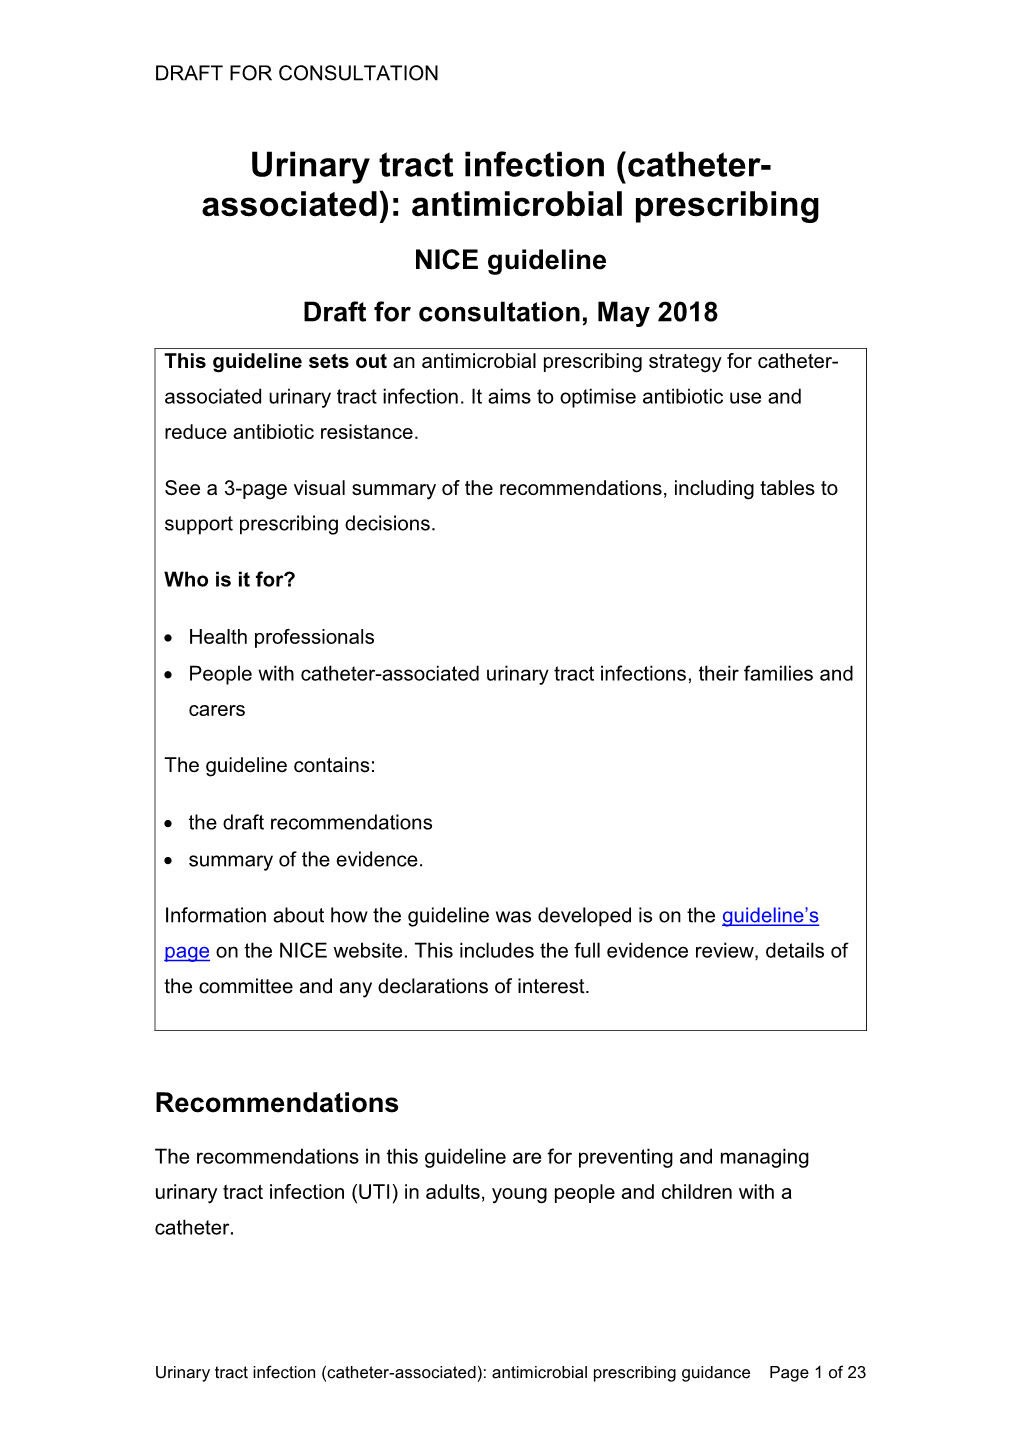 Urinary Tract Infection (Catheter- Associated): Antimicrobial Prescribing NICE Guideline Draft for Consultation, May 2018